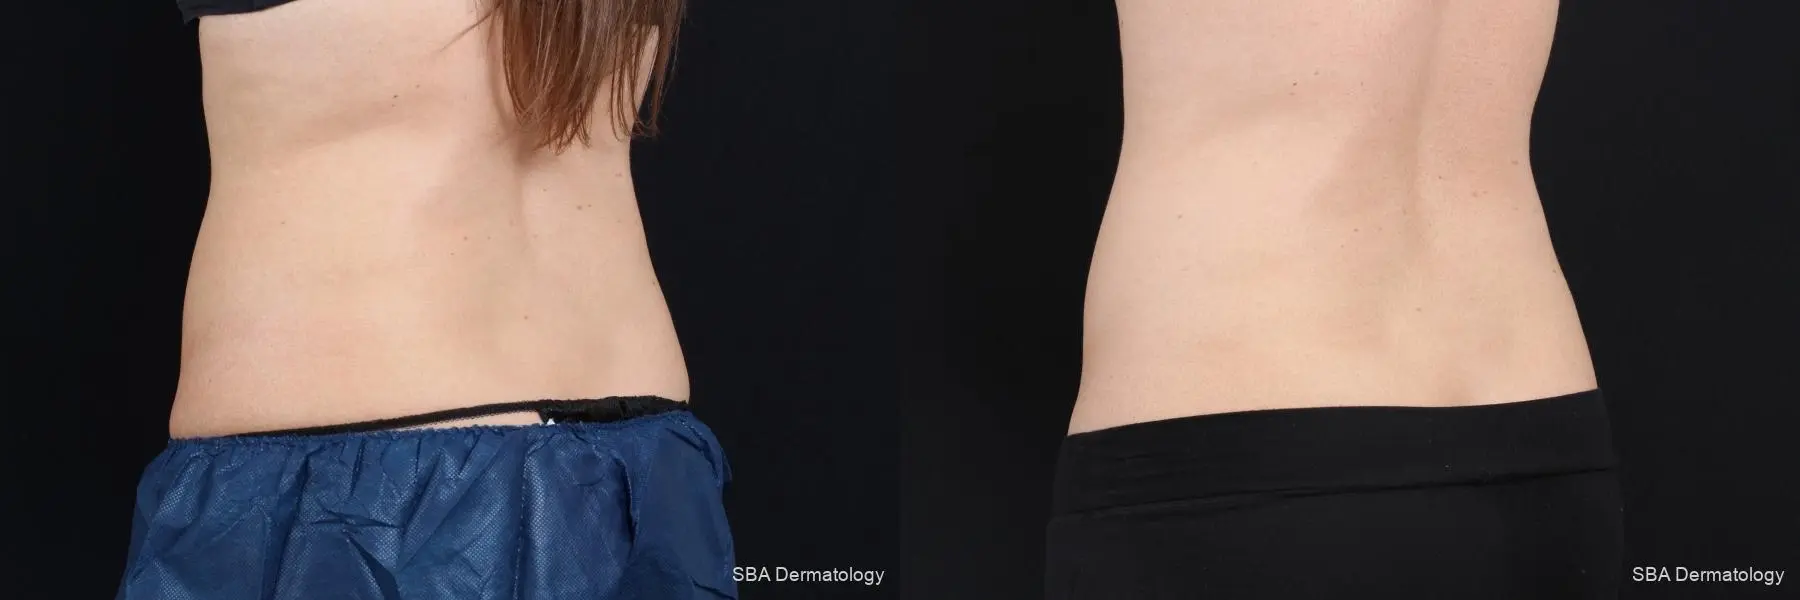 Coolsculpting: Patient 7 - Before and After 4